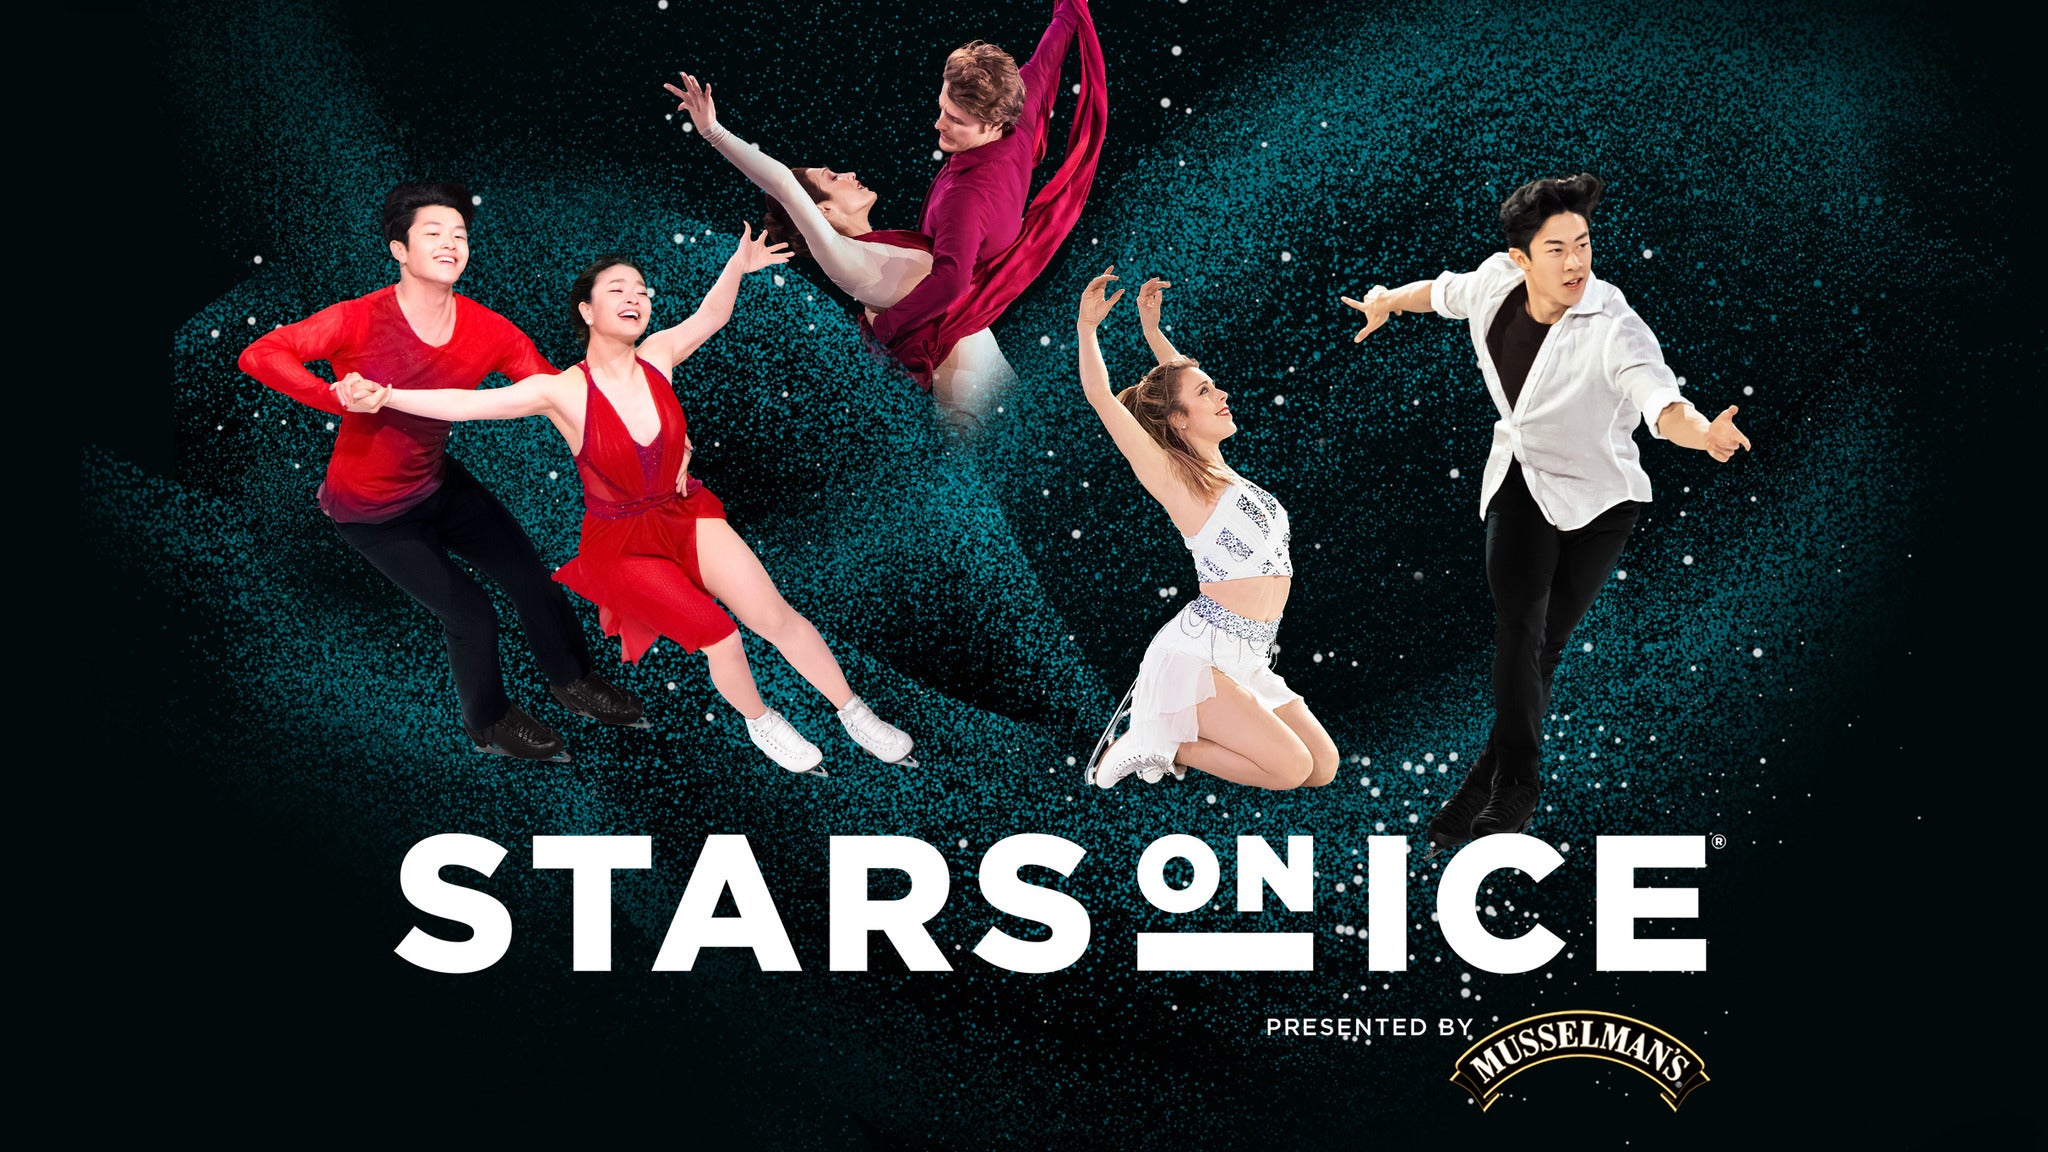 Stars on Ice presented by Musselman's Tickets | Event Dates & Schedule | Ticketmaster.com